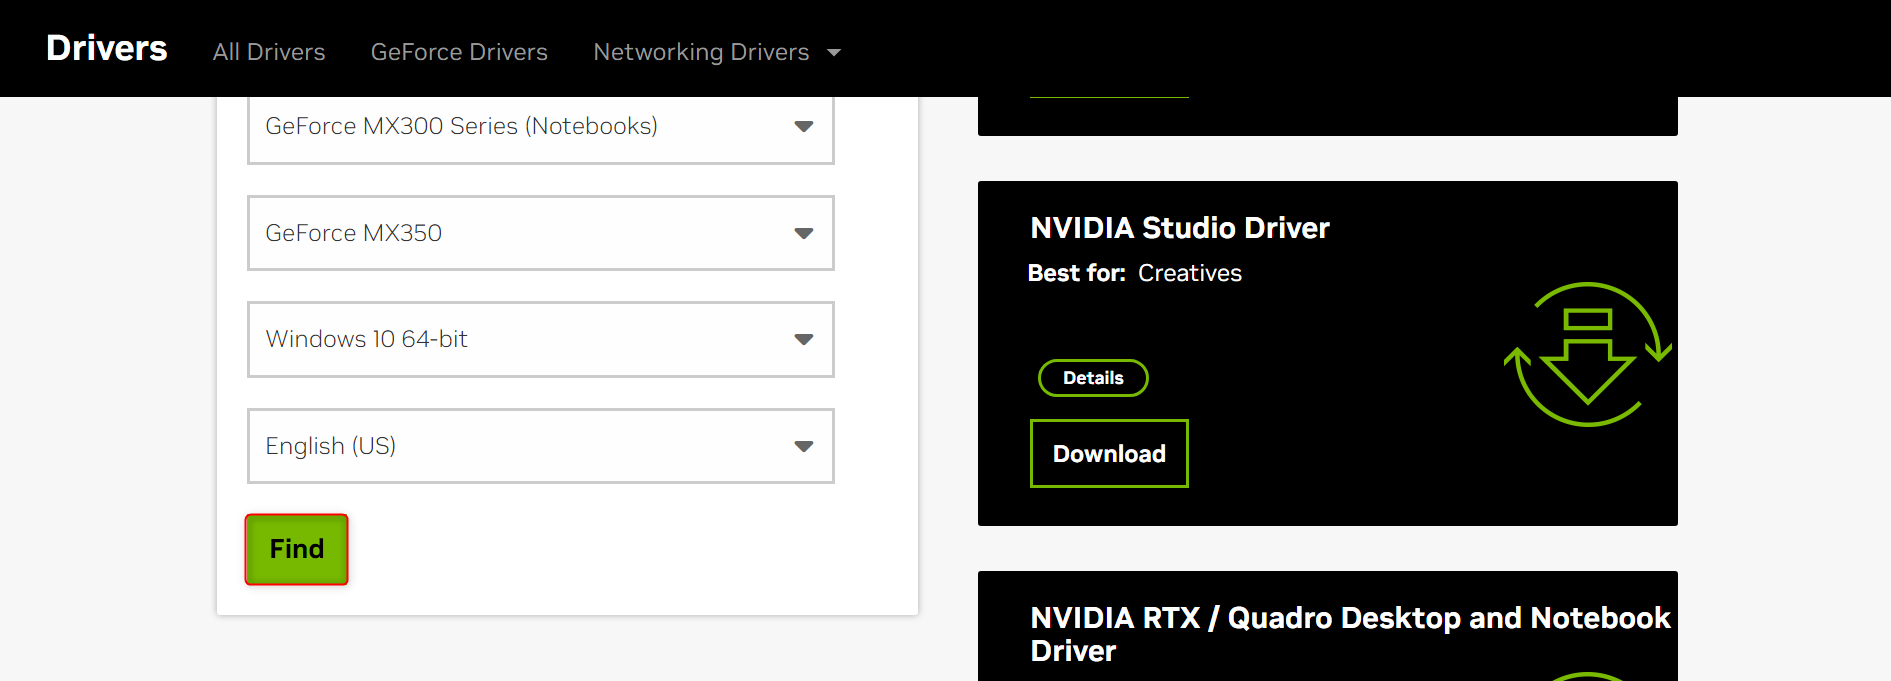 "Find" button in NVIDIA driver search tool.